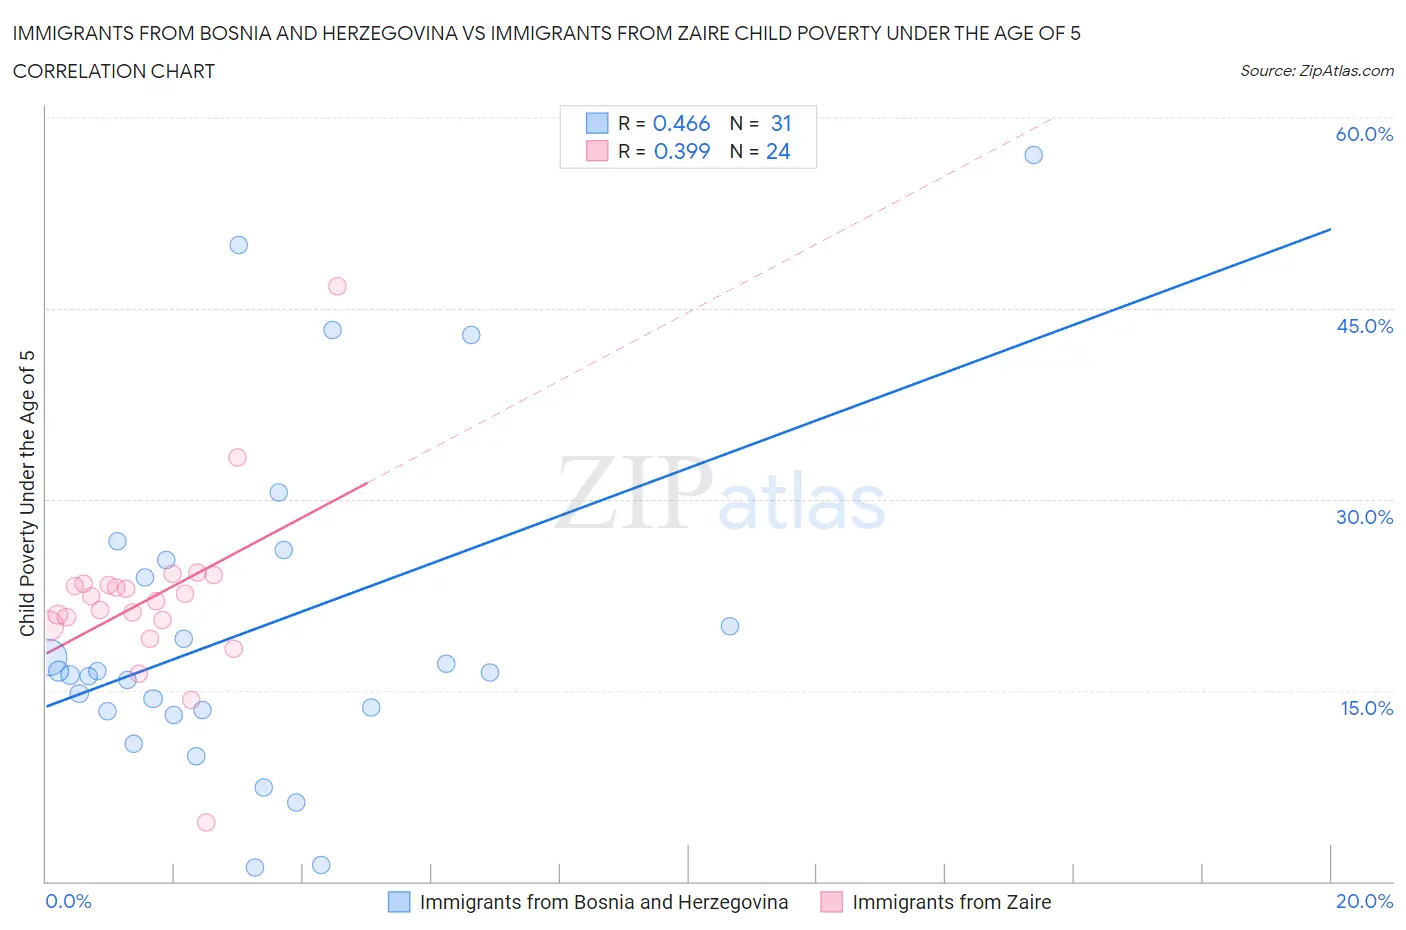 Immigrants from Bosnia and Herzegovina vs Immigrants from Zaire Child Poverty Under the Age of 5